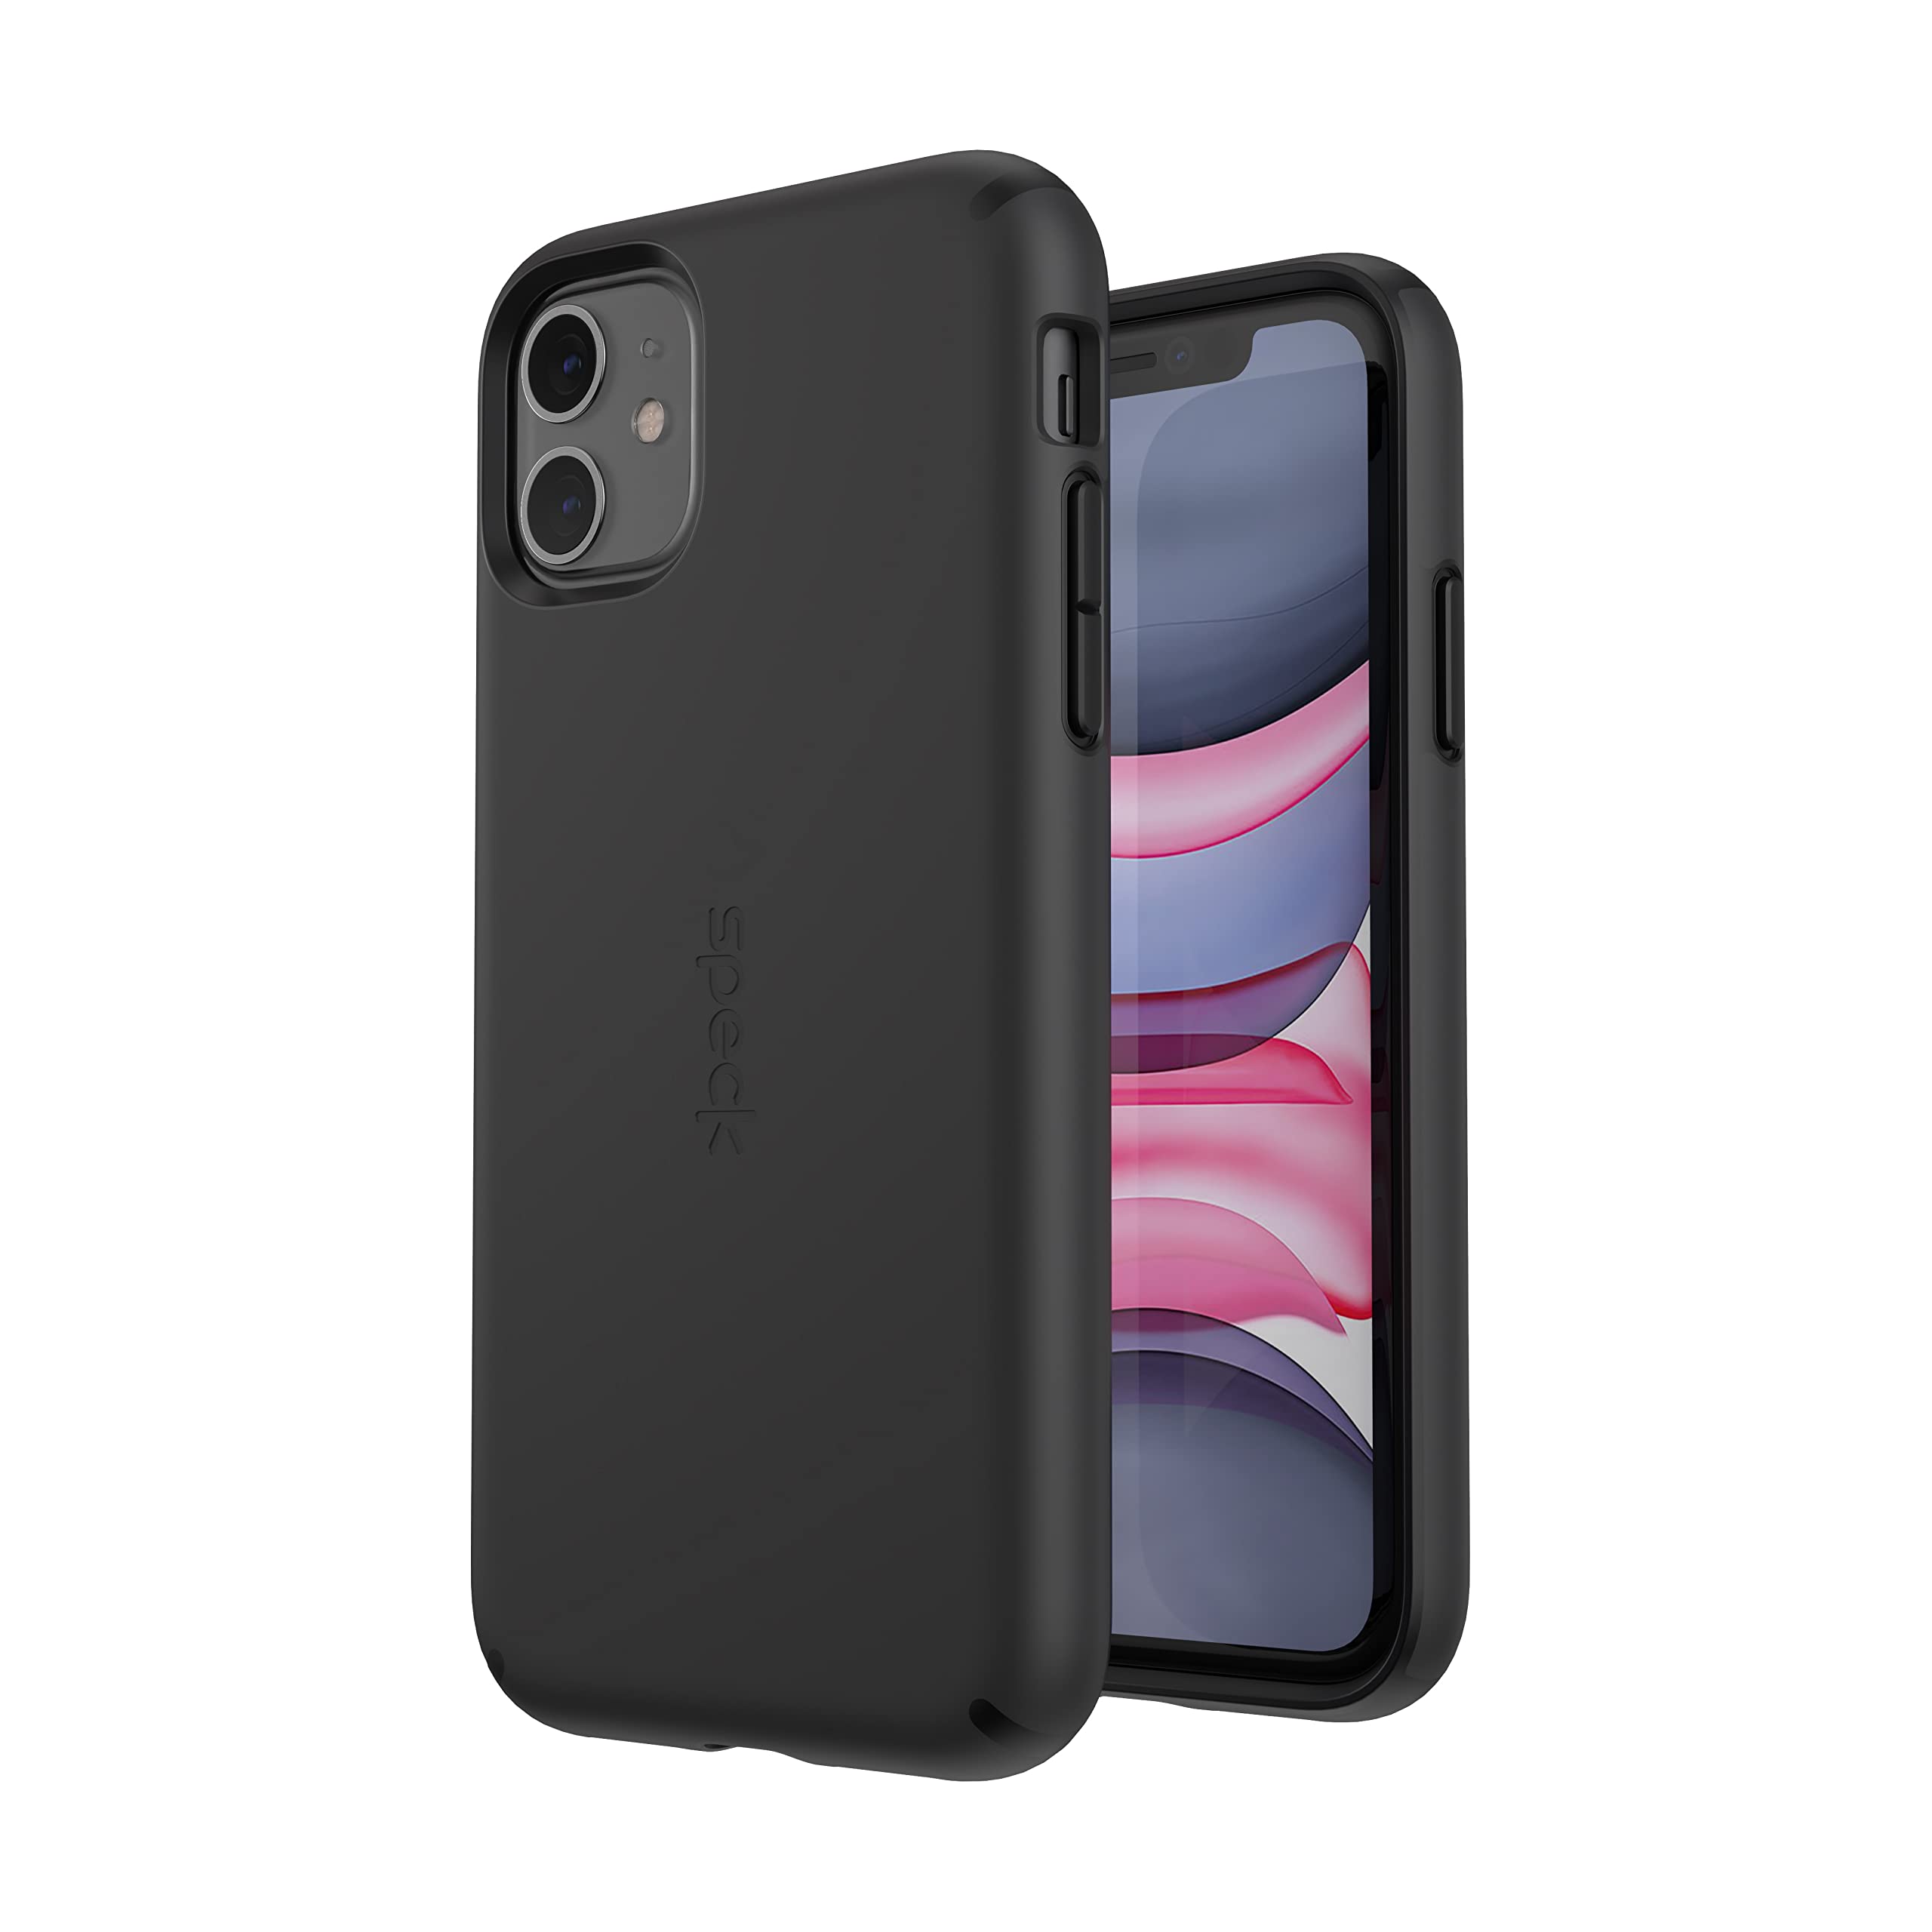 Speck iPhone 11 and iPhone XR Case - Drop Protection, Built for MagSafe Case for iPhone11 & iPhoneXR - Slim - Black, Black CandyShell Pro